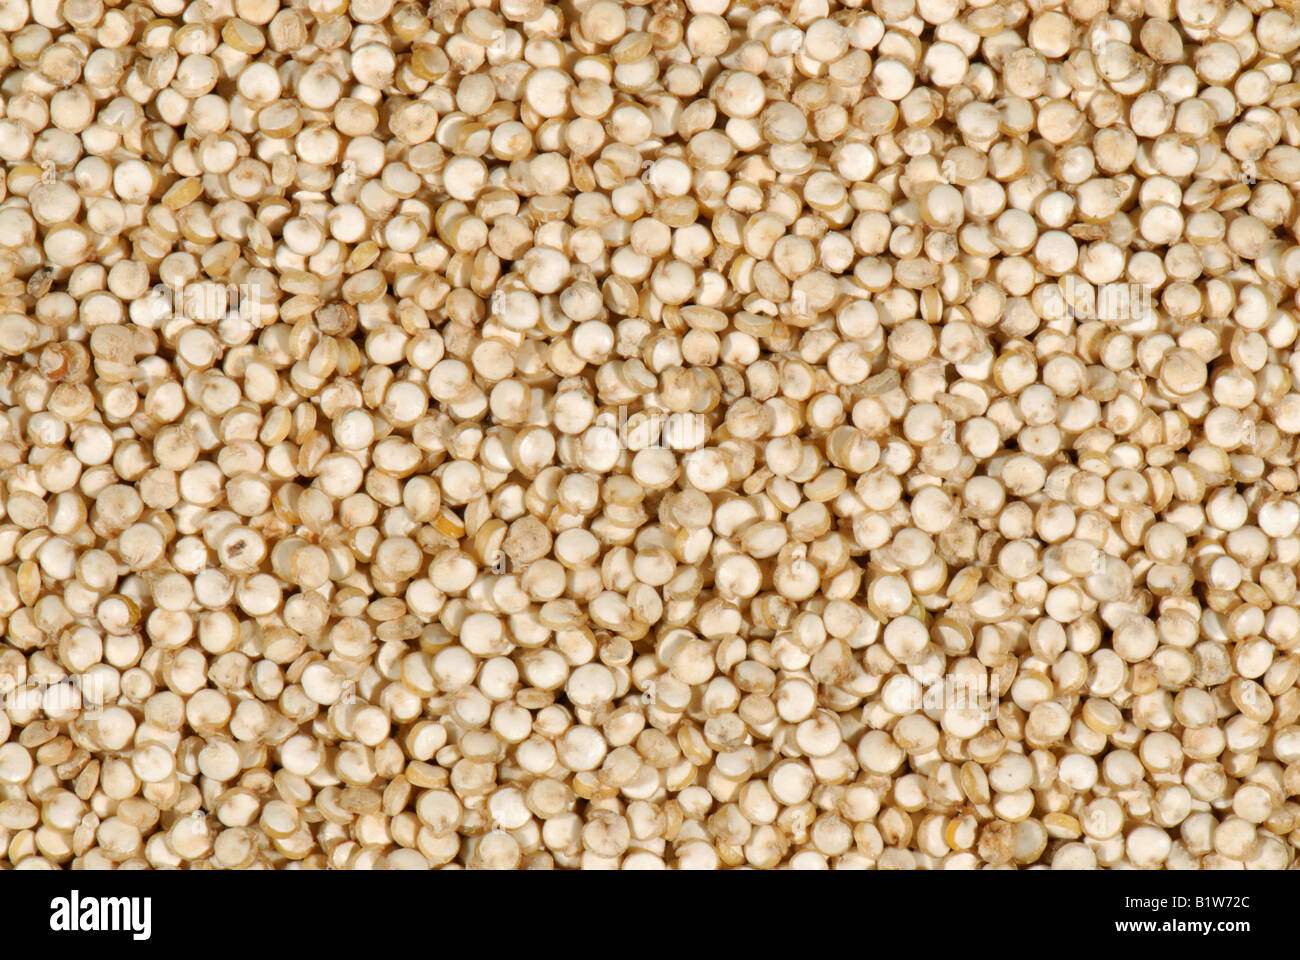 Organic quinoa seeds sold in health food shops Stock Photo